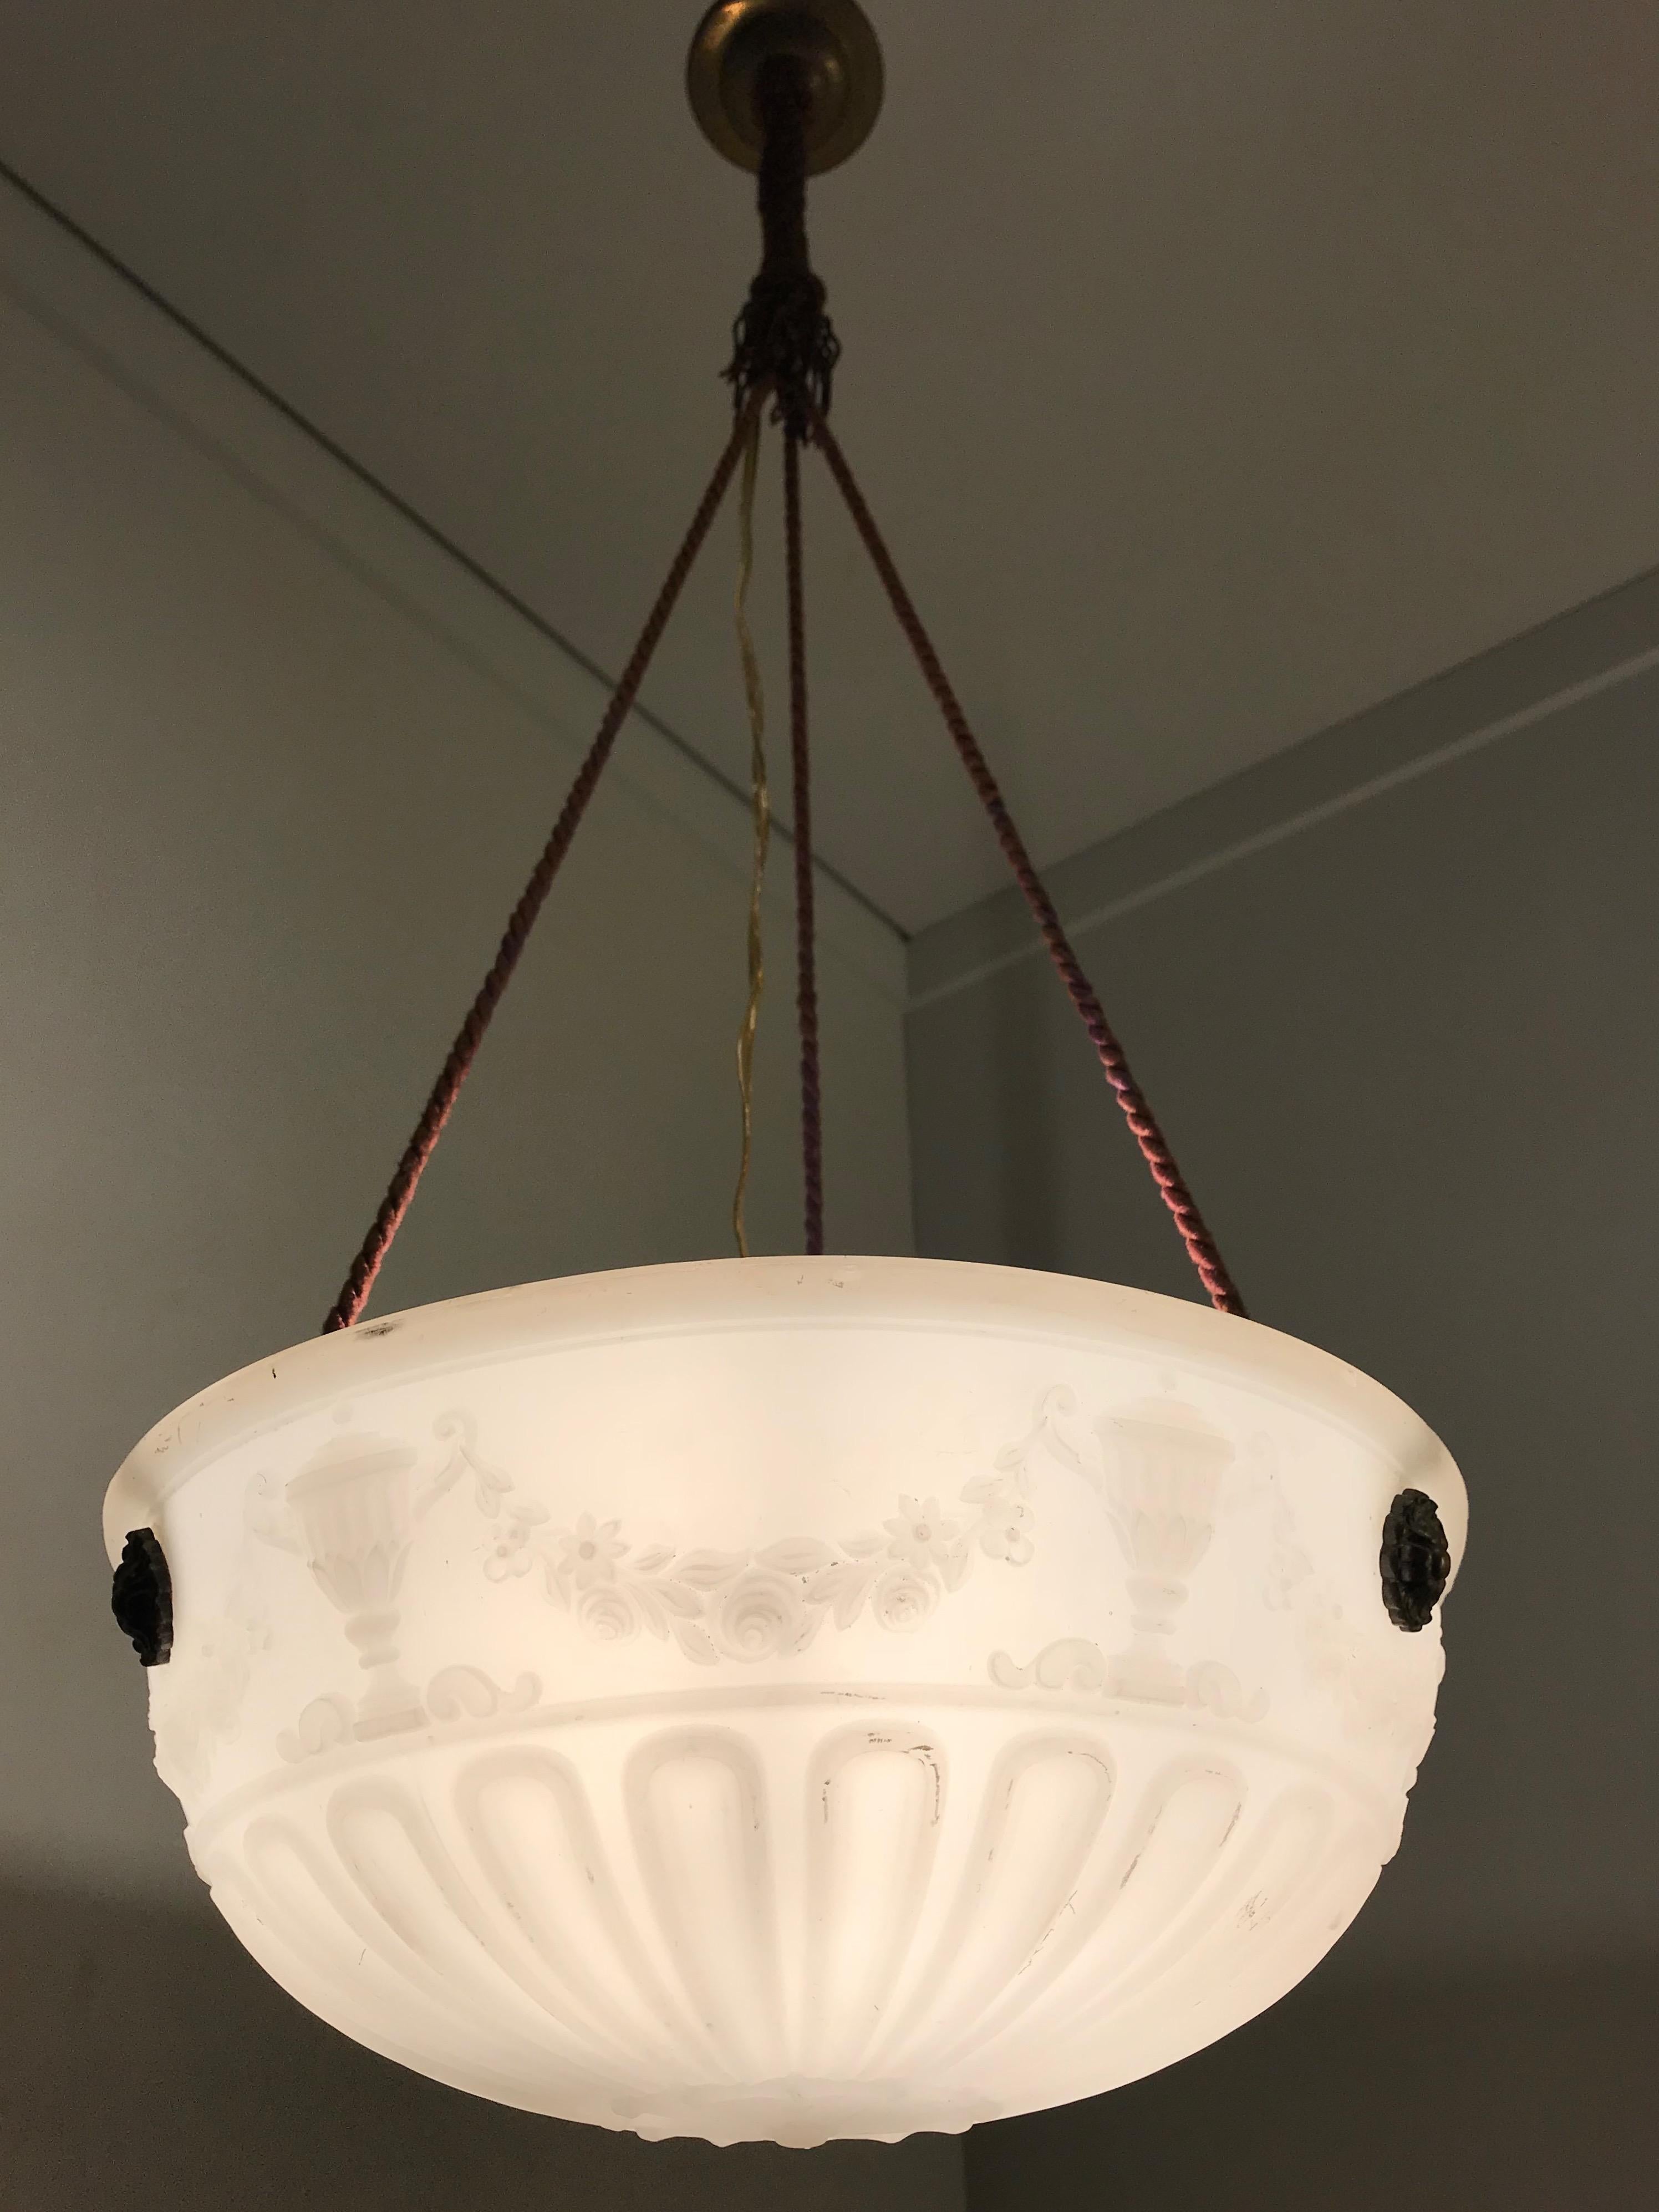 20th Century Striking Classical Design Press Glass with Original Rope Pendant / Light Fixture For Sale